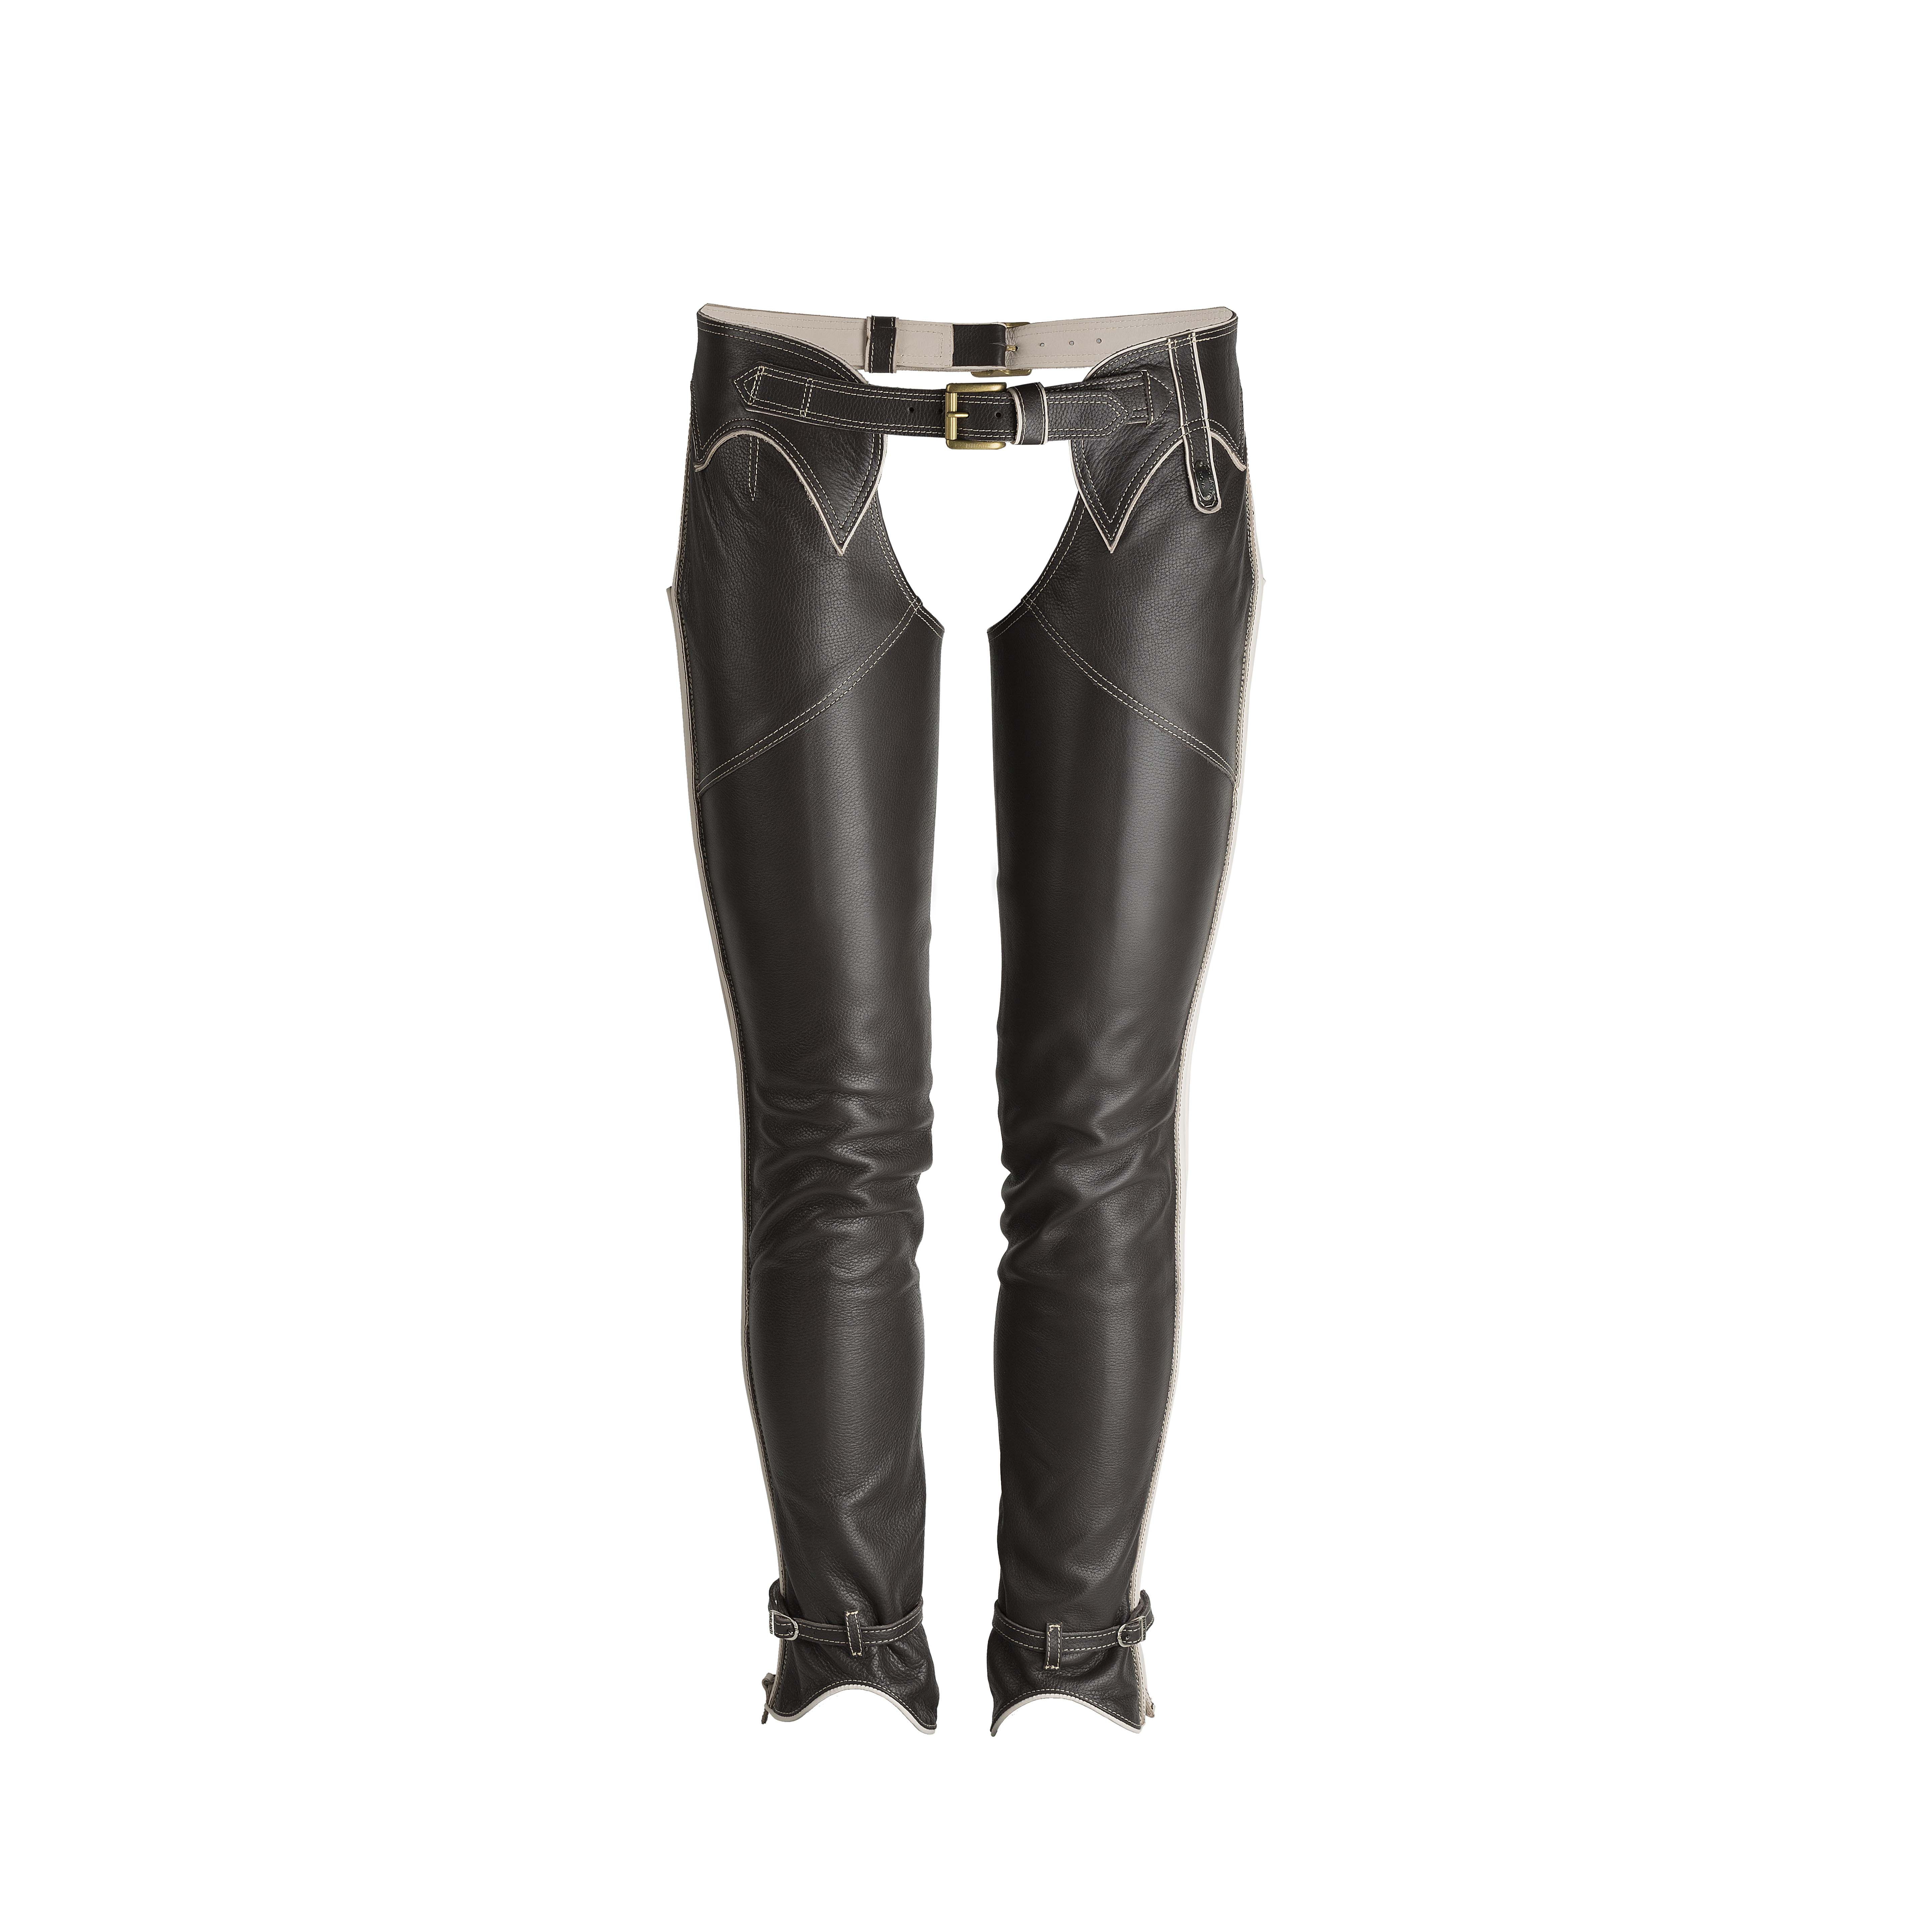 Parlanti Classic Full Leather Chaps 